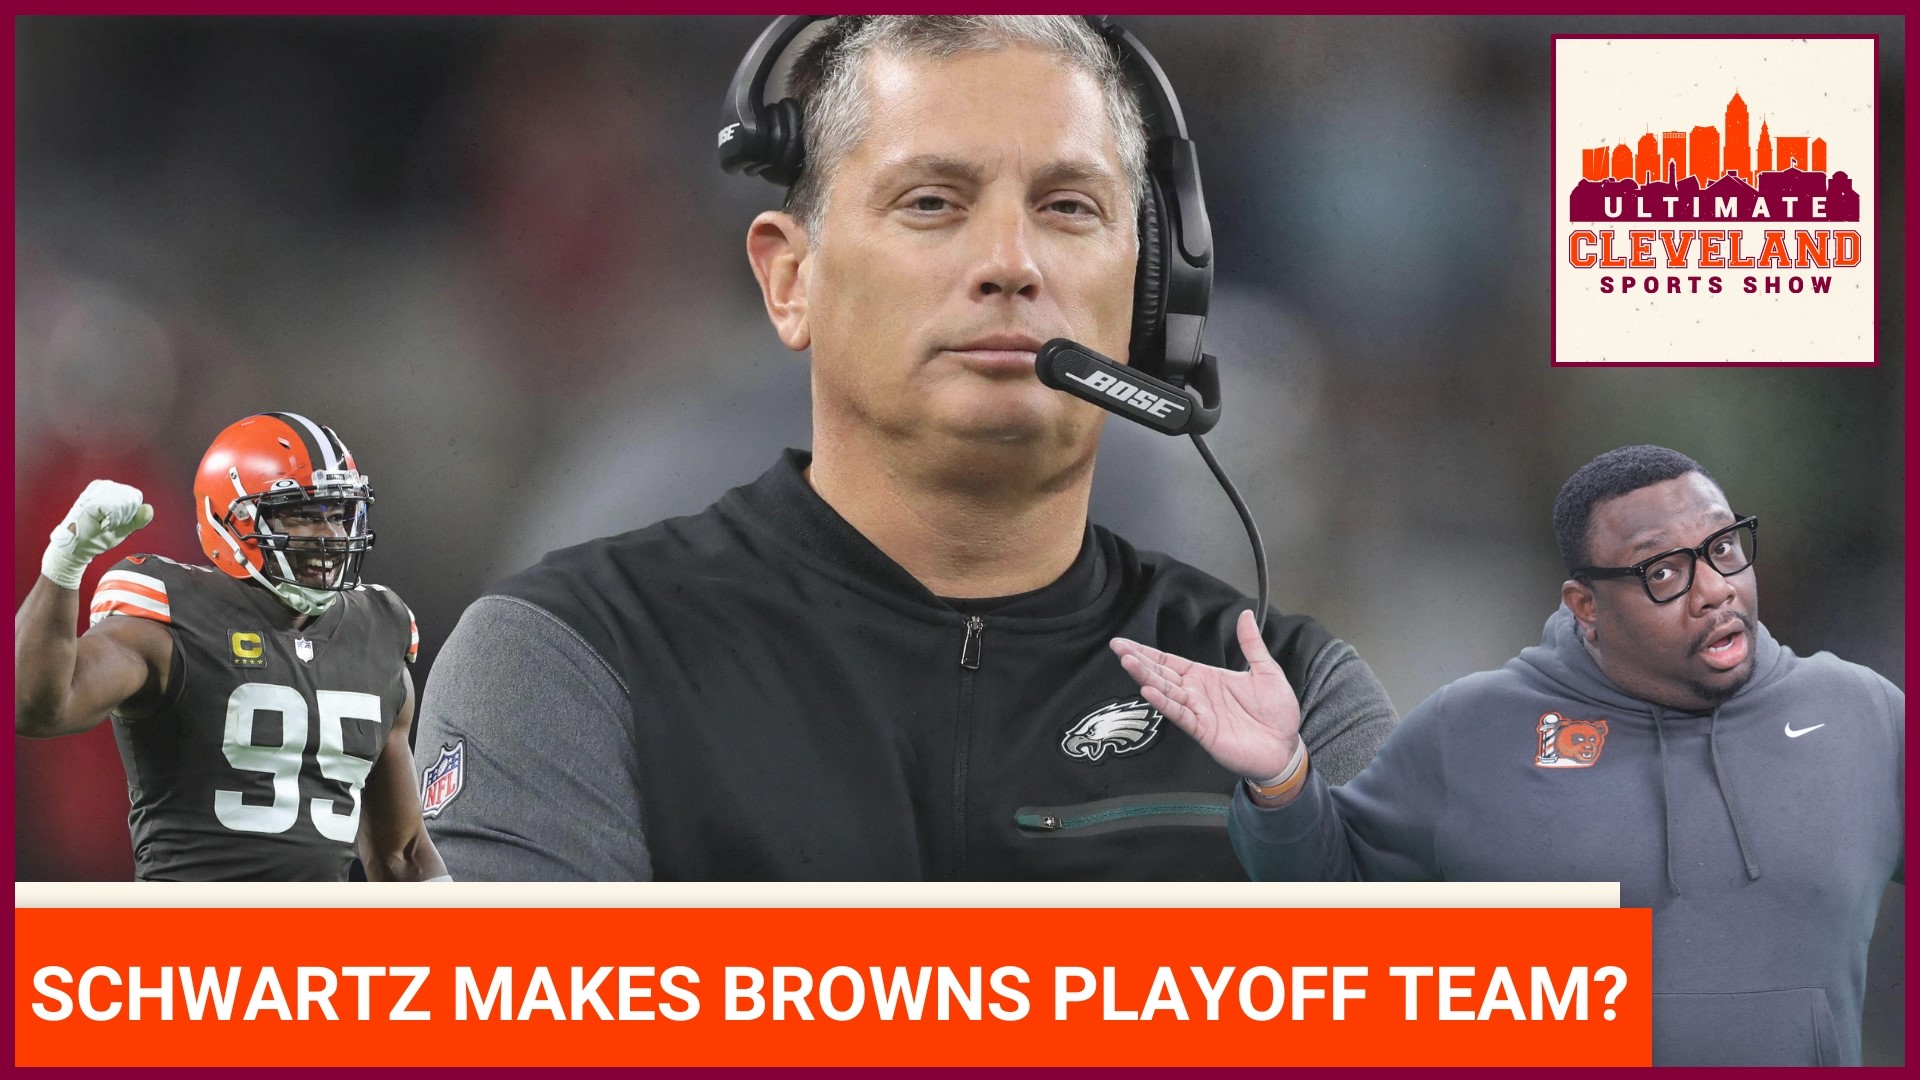 Can the hiring of Jim Schwartz make the Browns an automatic playoff team?